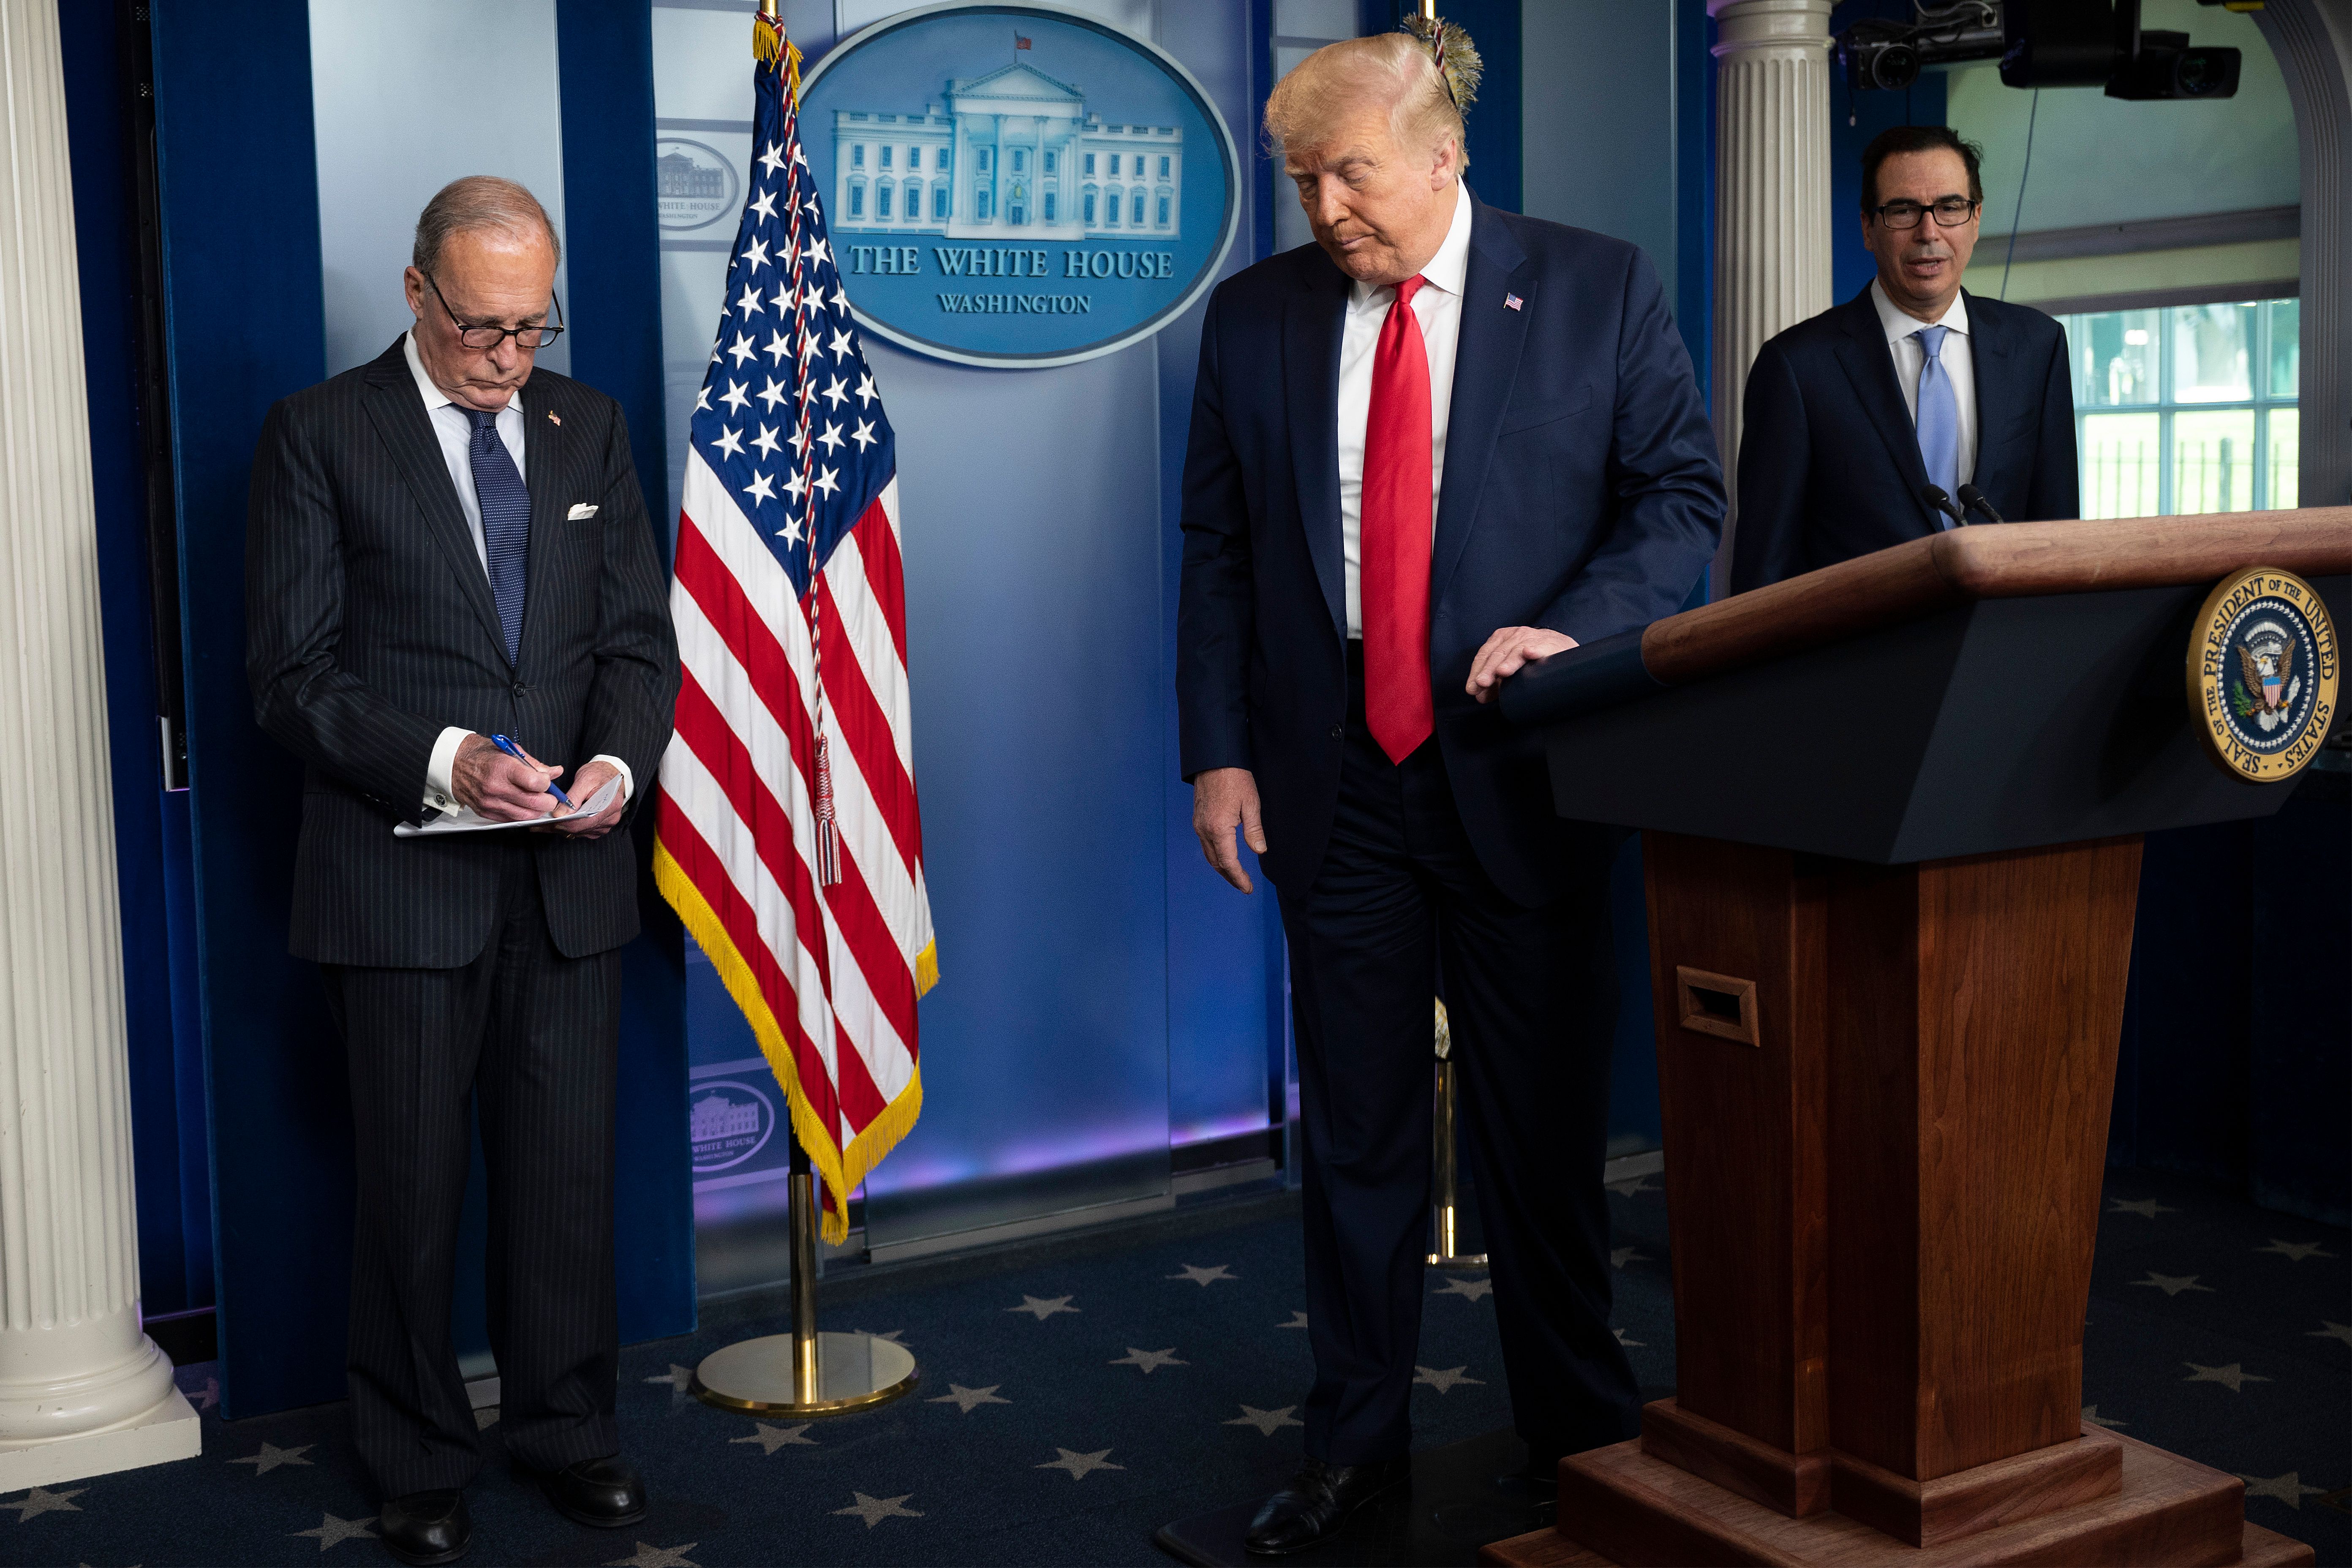 US President Donald Trump, with Director of the National Economic Council Larry Kudlow (L) and US Secretary of the Treasury Steven Mnuchin, leaves after speaking to the press in the Brady Briefing Room of the White House in Washington, DC, on July 2, 2020. - Trump on Thursday hailed the "spectacular" US jobs report for June, saying the return to work of 4.8 million Americans marks a huge comeback for an economy hit hard by the coronavirus pandemic. (Photo by JIM WATSON/AFP via Getty Images)